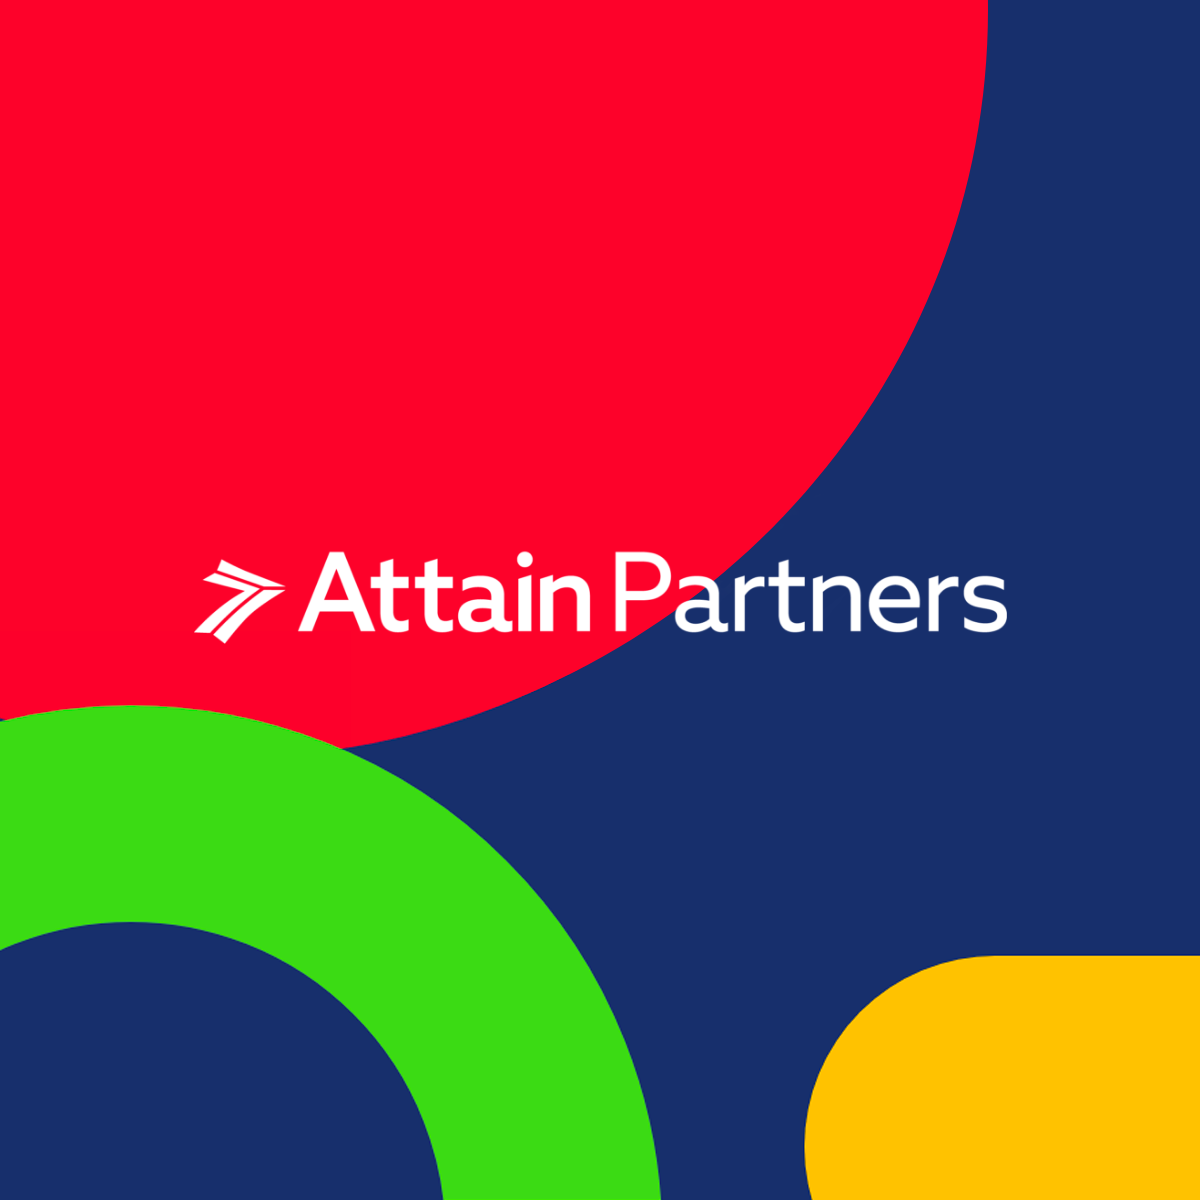 White Attain Partners logo with multi-colored shapes background